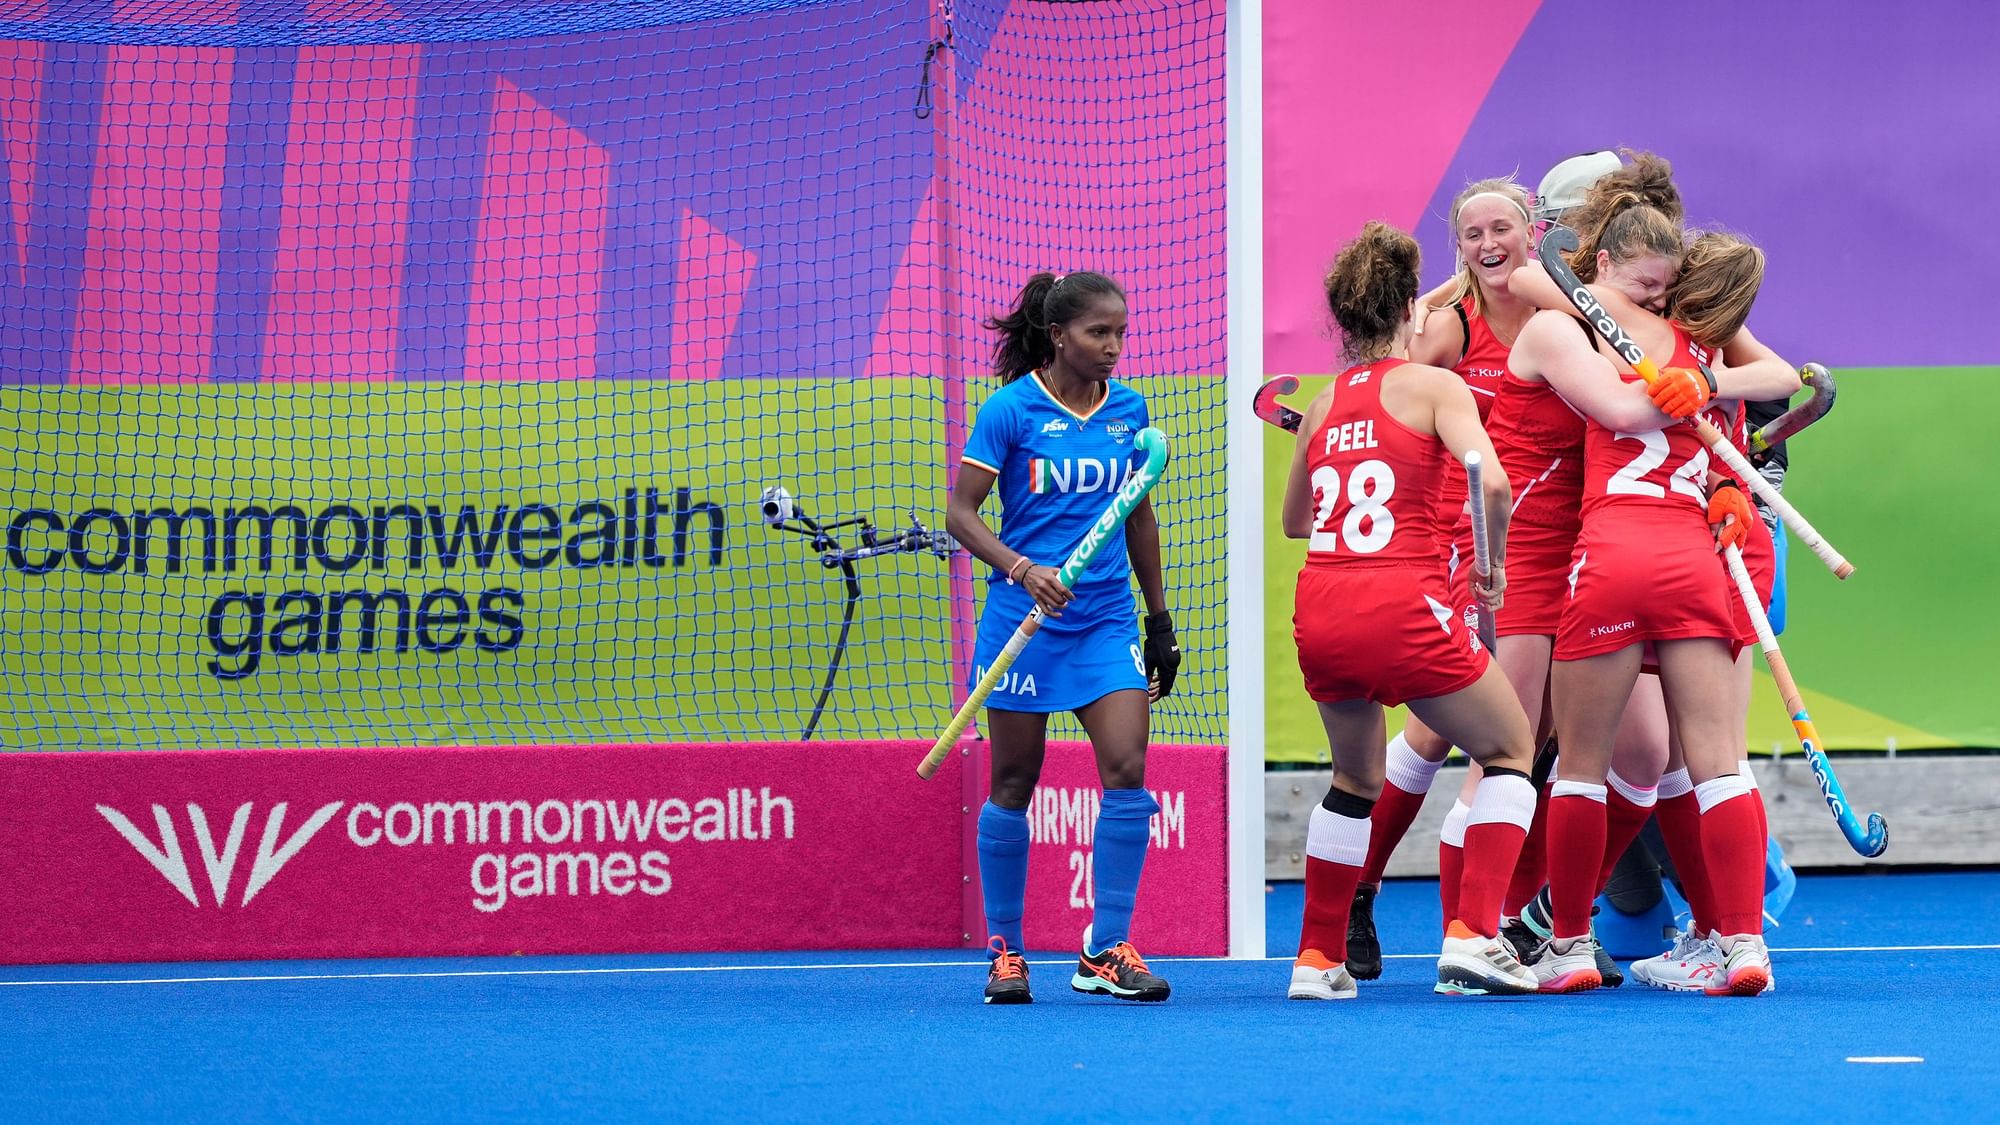 <div class="paragraphs"><p>England players celebrate after scoring their side's second goal during the women's Pool A hockey match against India at the 2022 Commonwealth Games in Birmingham on Tuesday.</p></div>